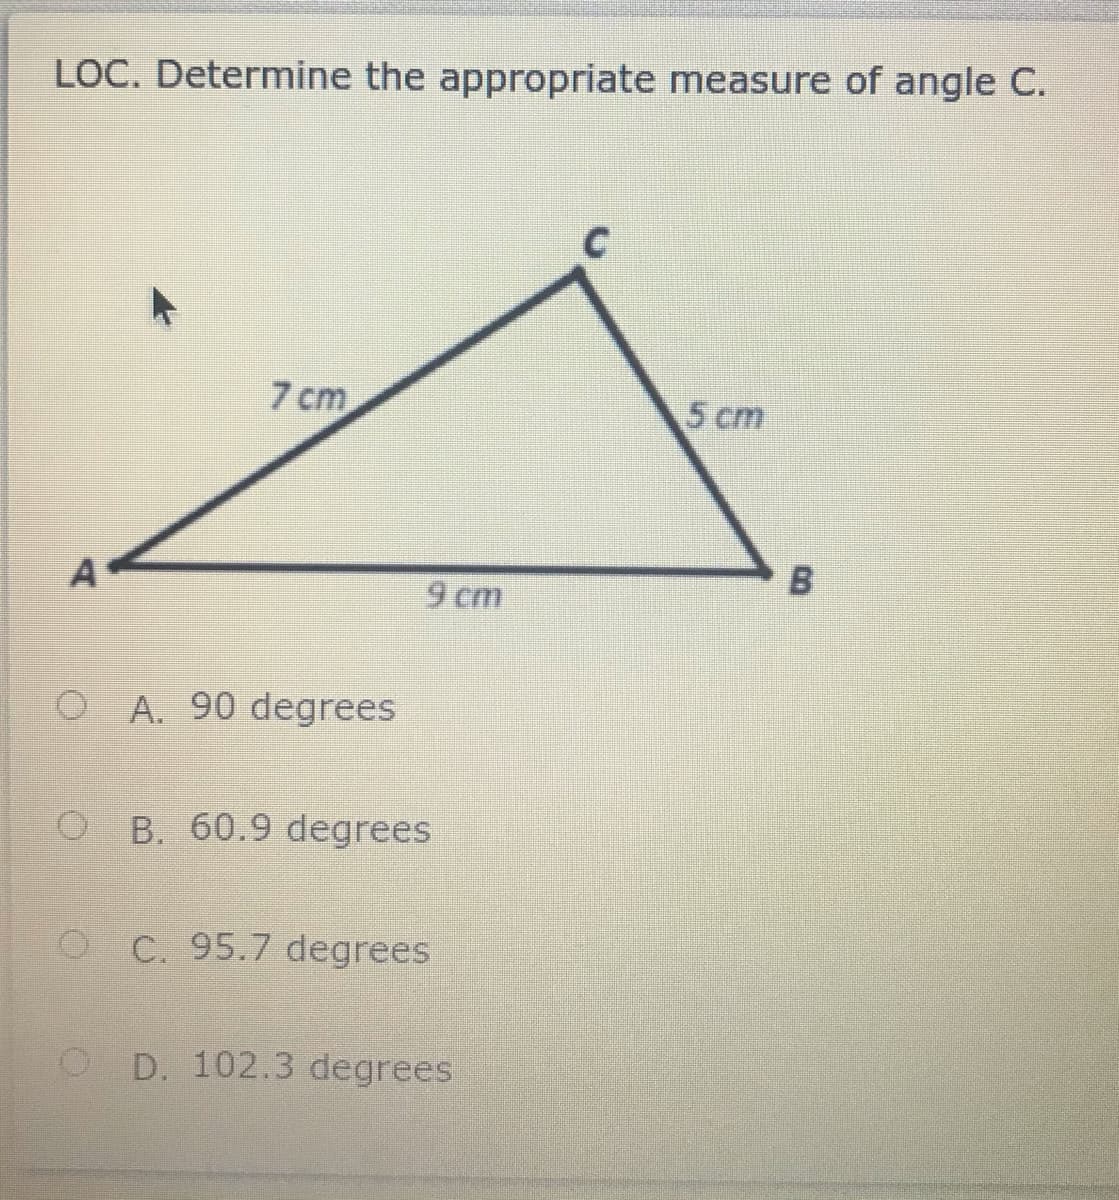 LOC. Determine the appropriate measure of angle C.
7 cm
5 cm
9 cm
O A. 90 degrees
O B. 60.9 degrees
O C. 95.7 degrees
O D. 102.3 degrees
